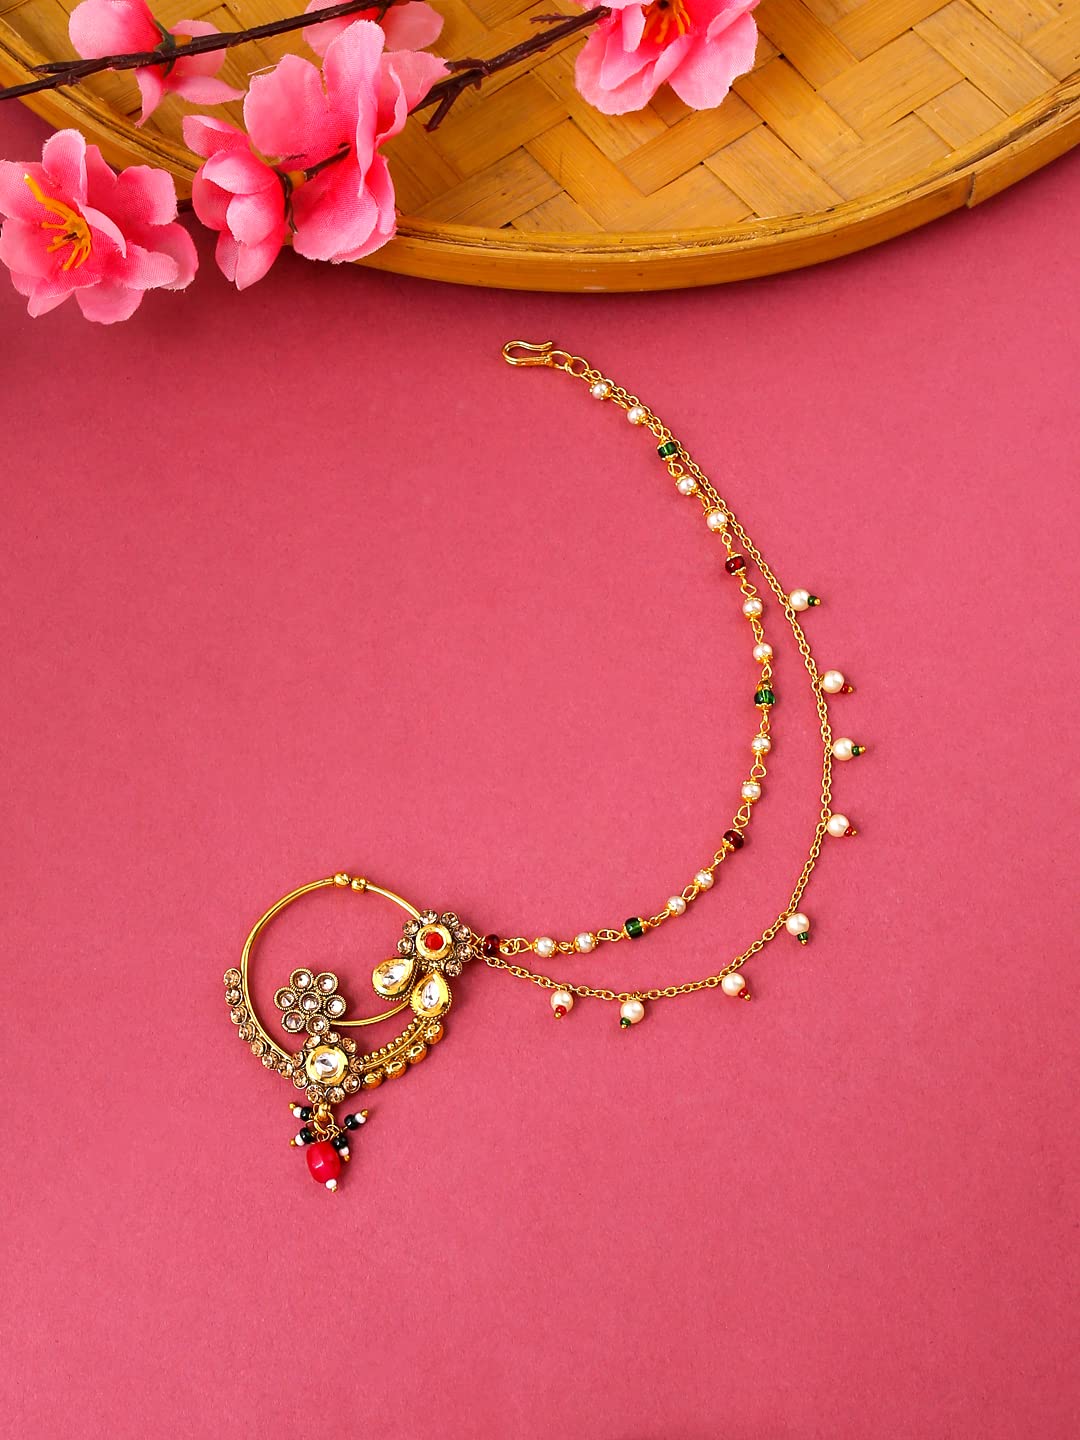 Yellow Chimes Nose Pin for Women Gold Toned Non Piercing Crystal Studded Beads Chain and Floral Designed Nose Pin with Chain for Women and Girls